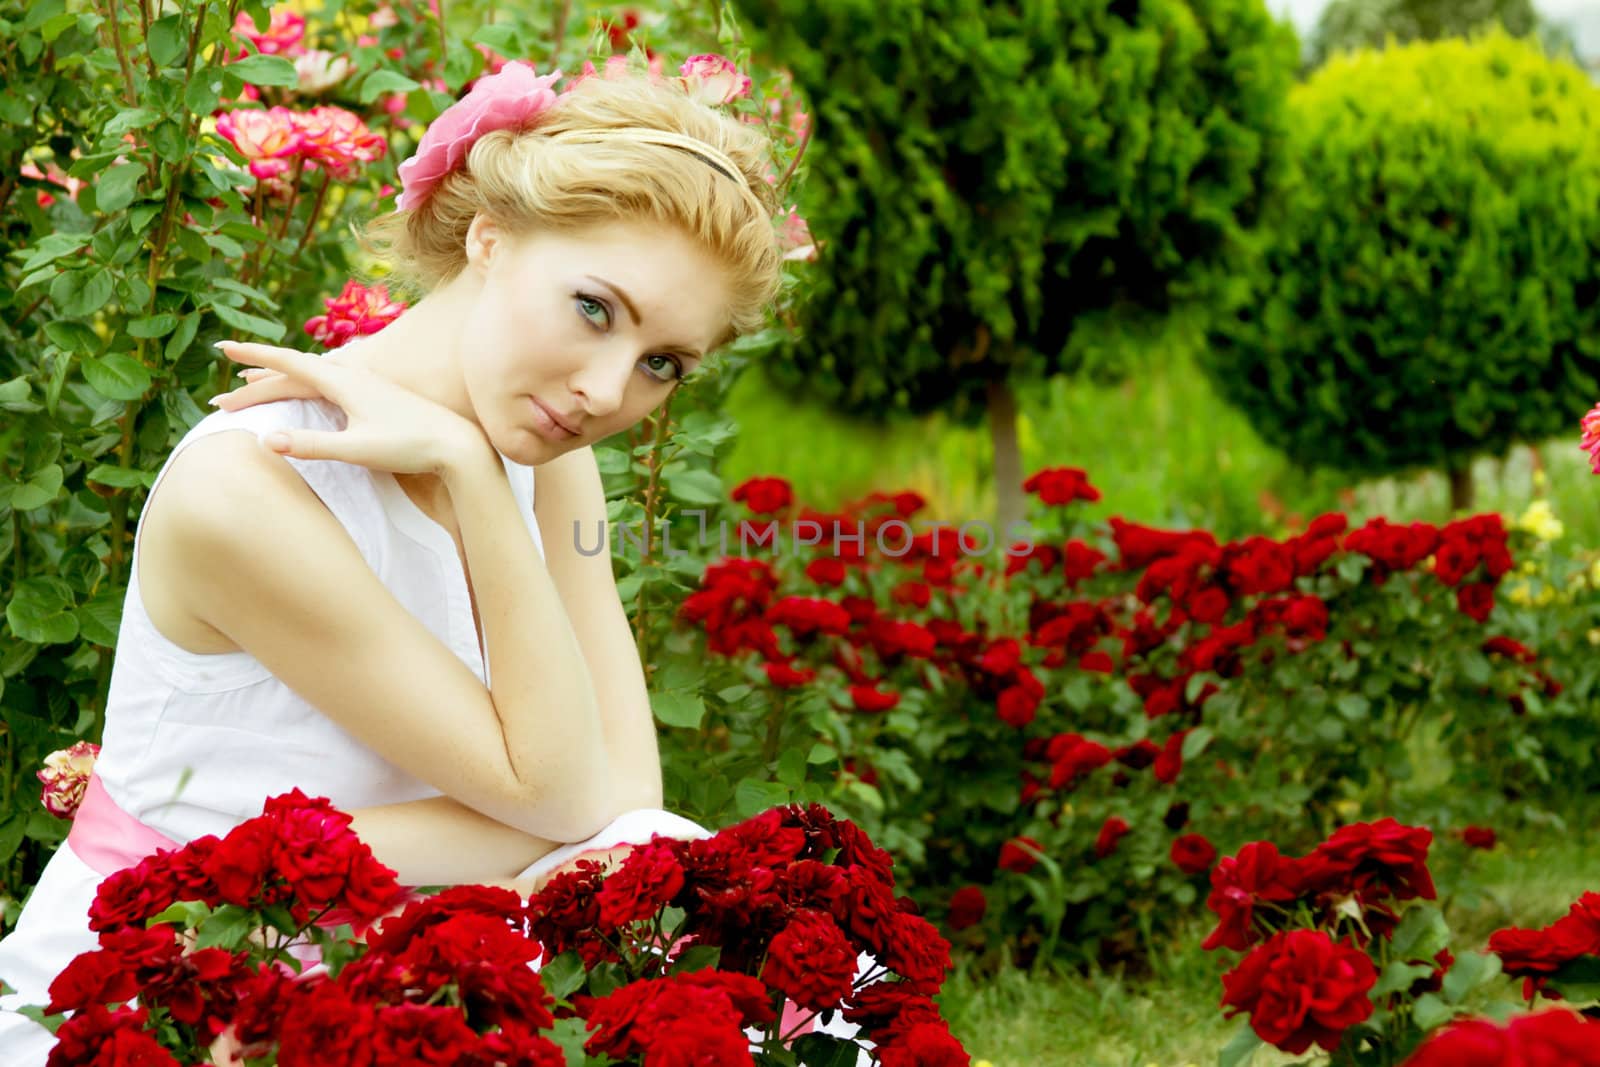 Woman in white dress among rose garden by Angel_a